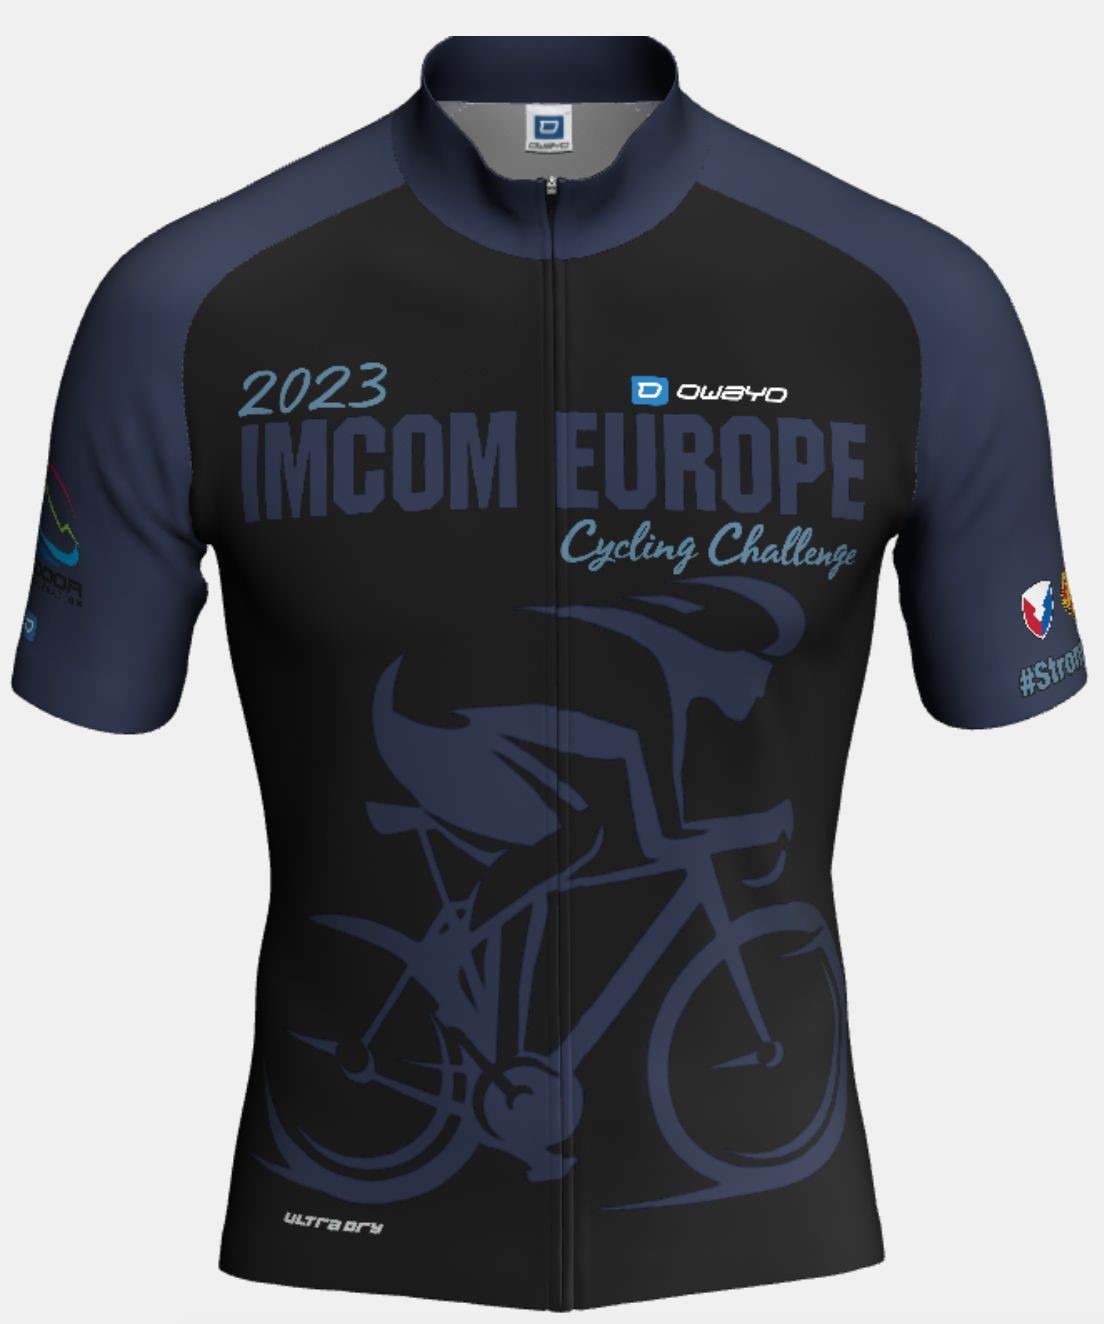 2023_Cycling_front.jpg